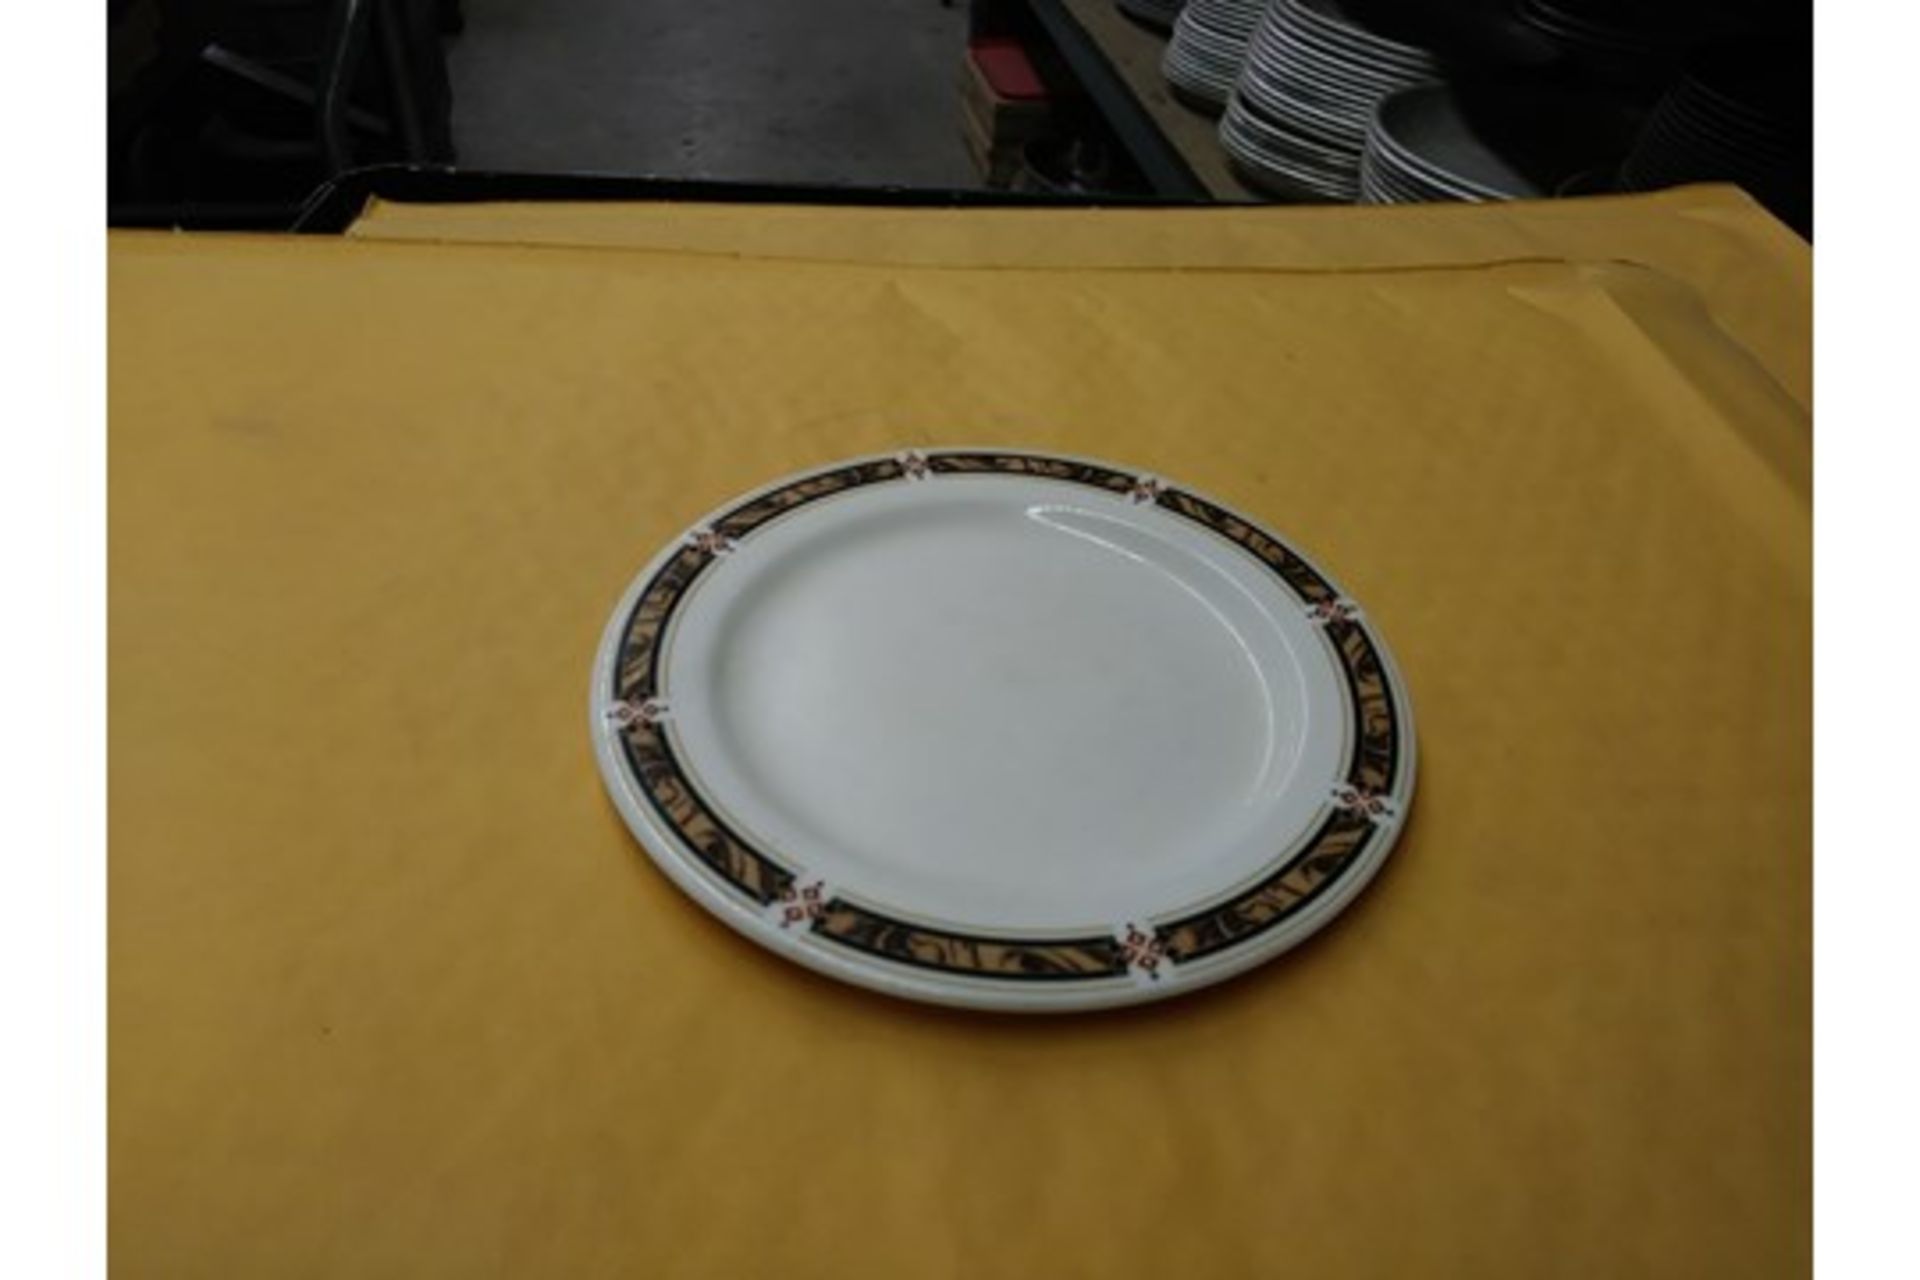 6" STEELITE PLATE (includes approx QTY 55 in this lot)